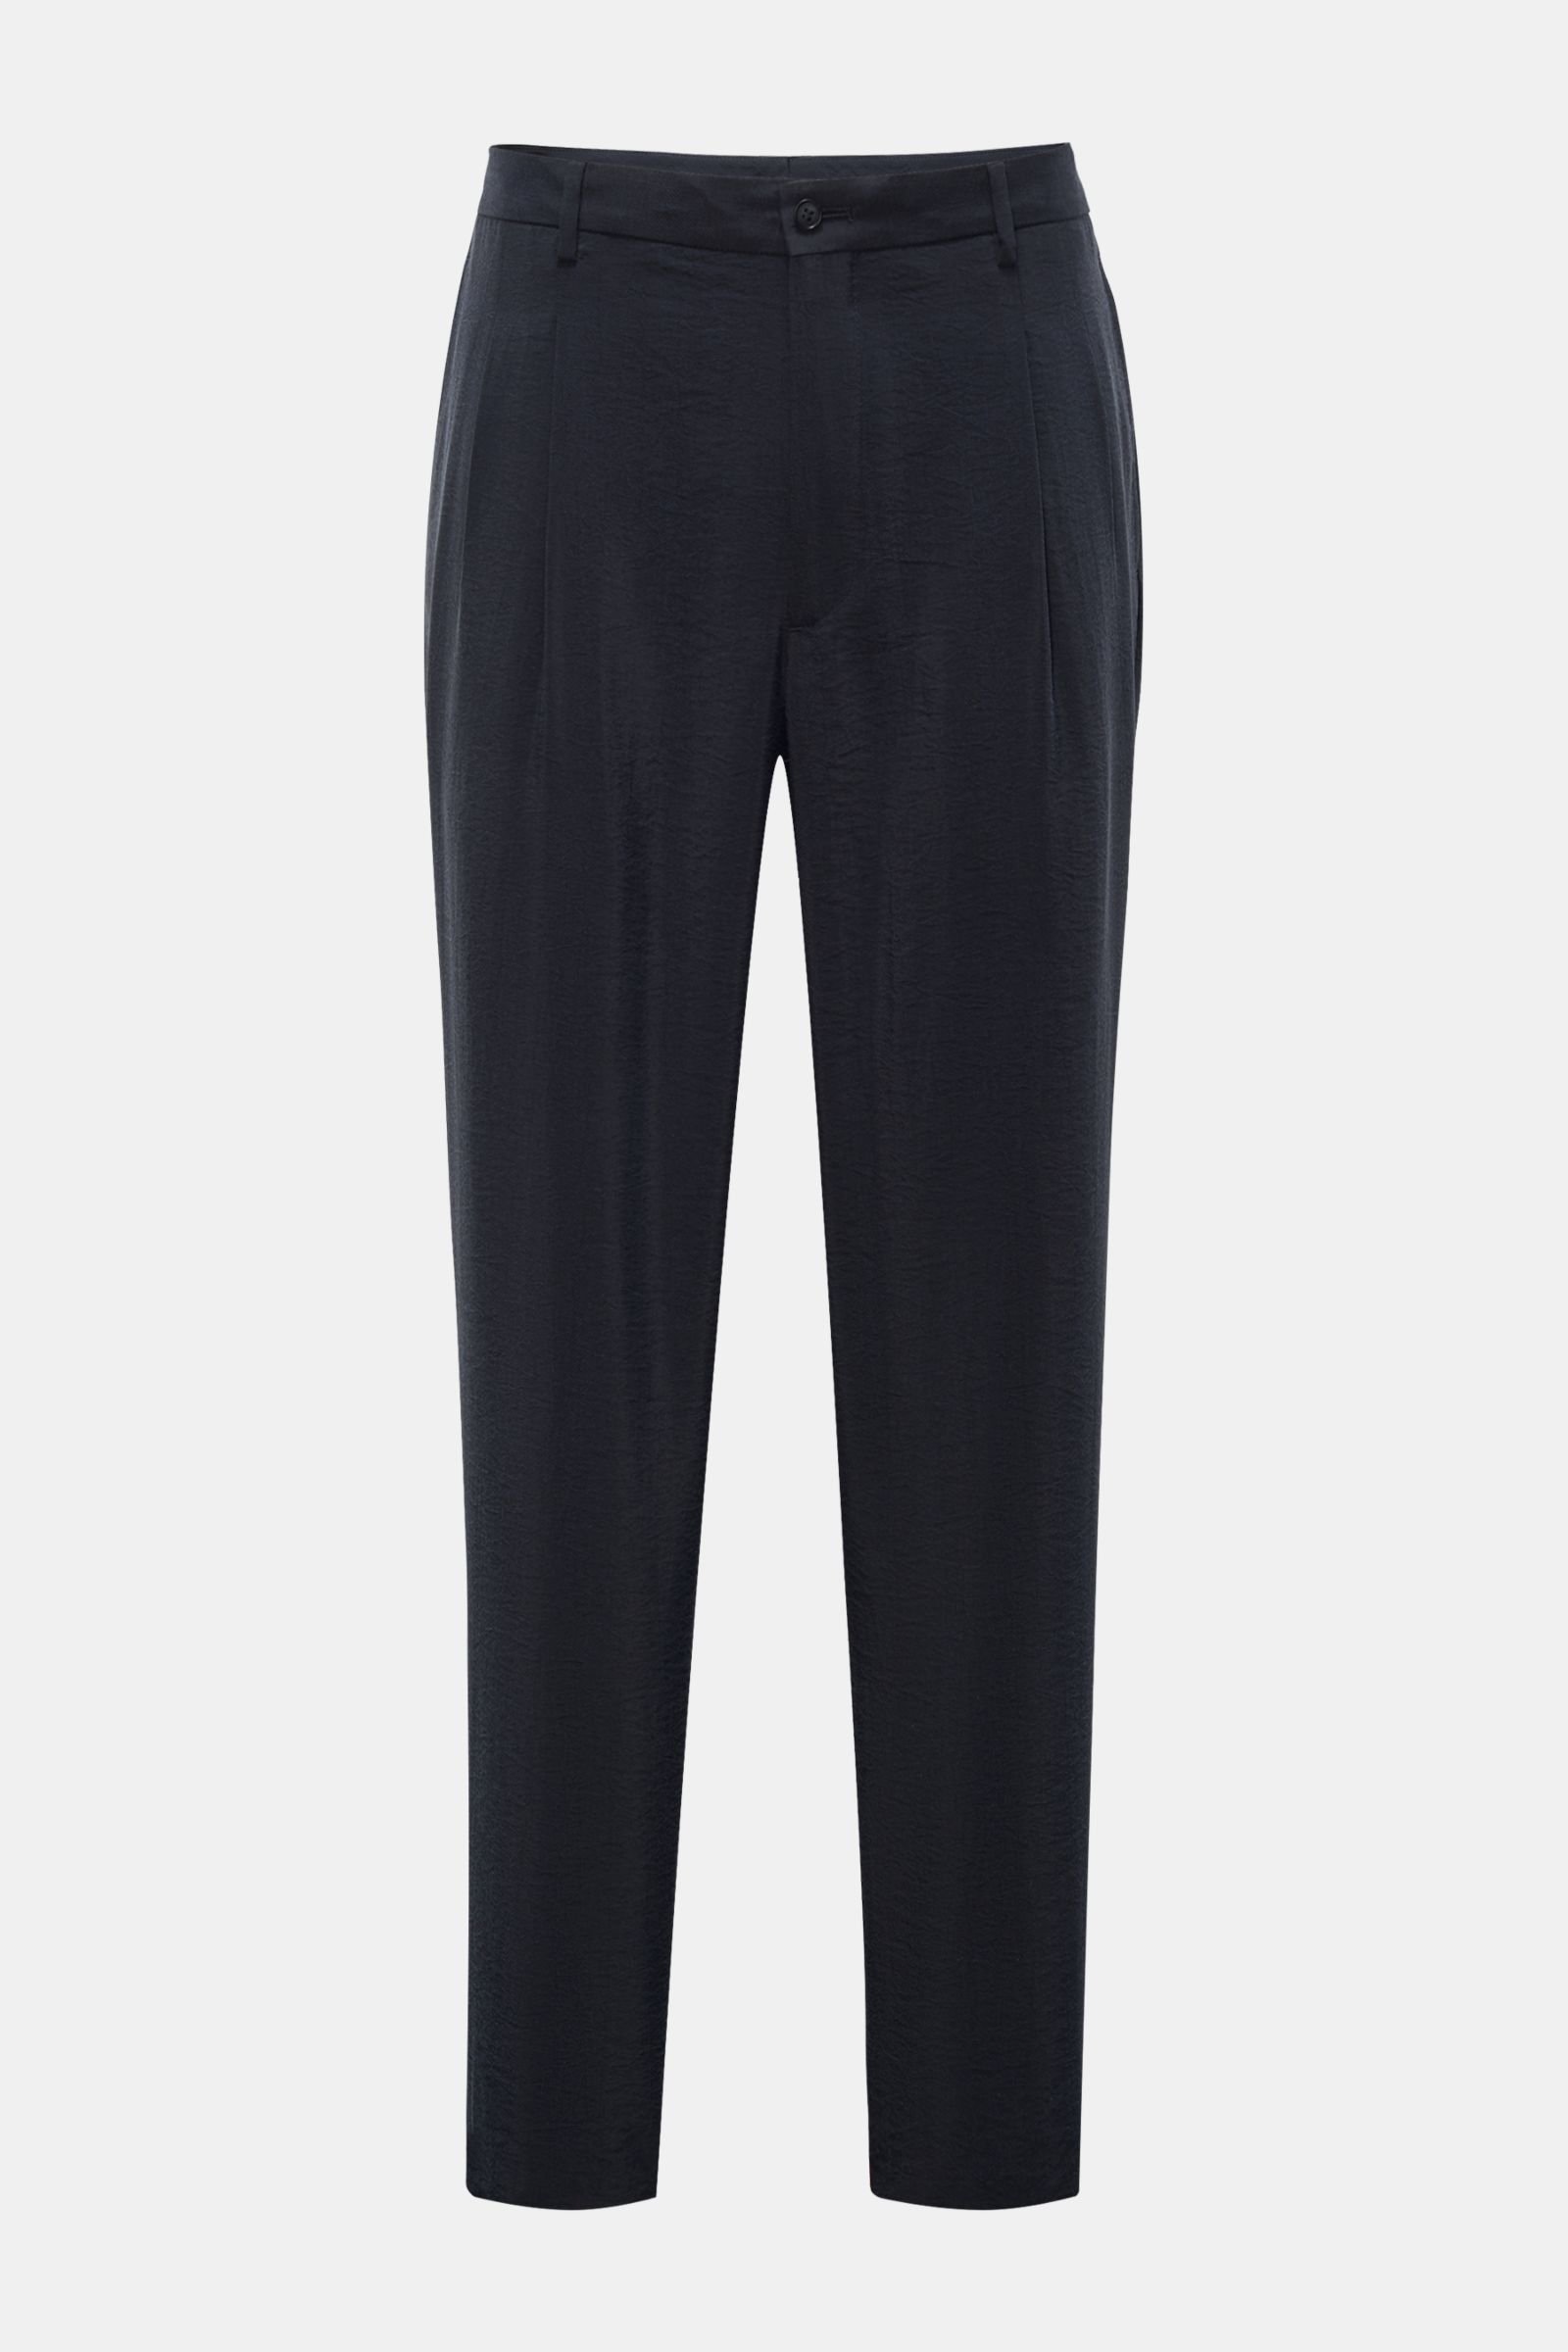 Silk trousers navy